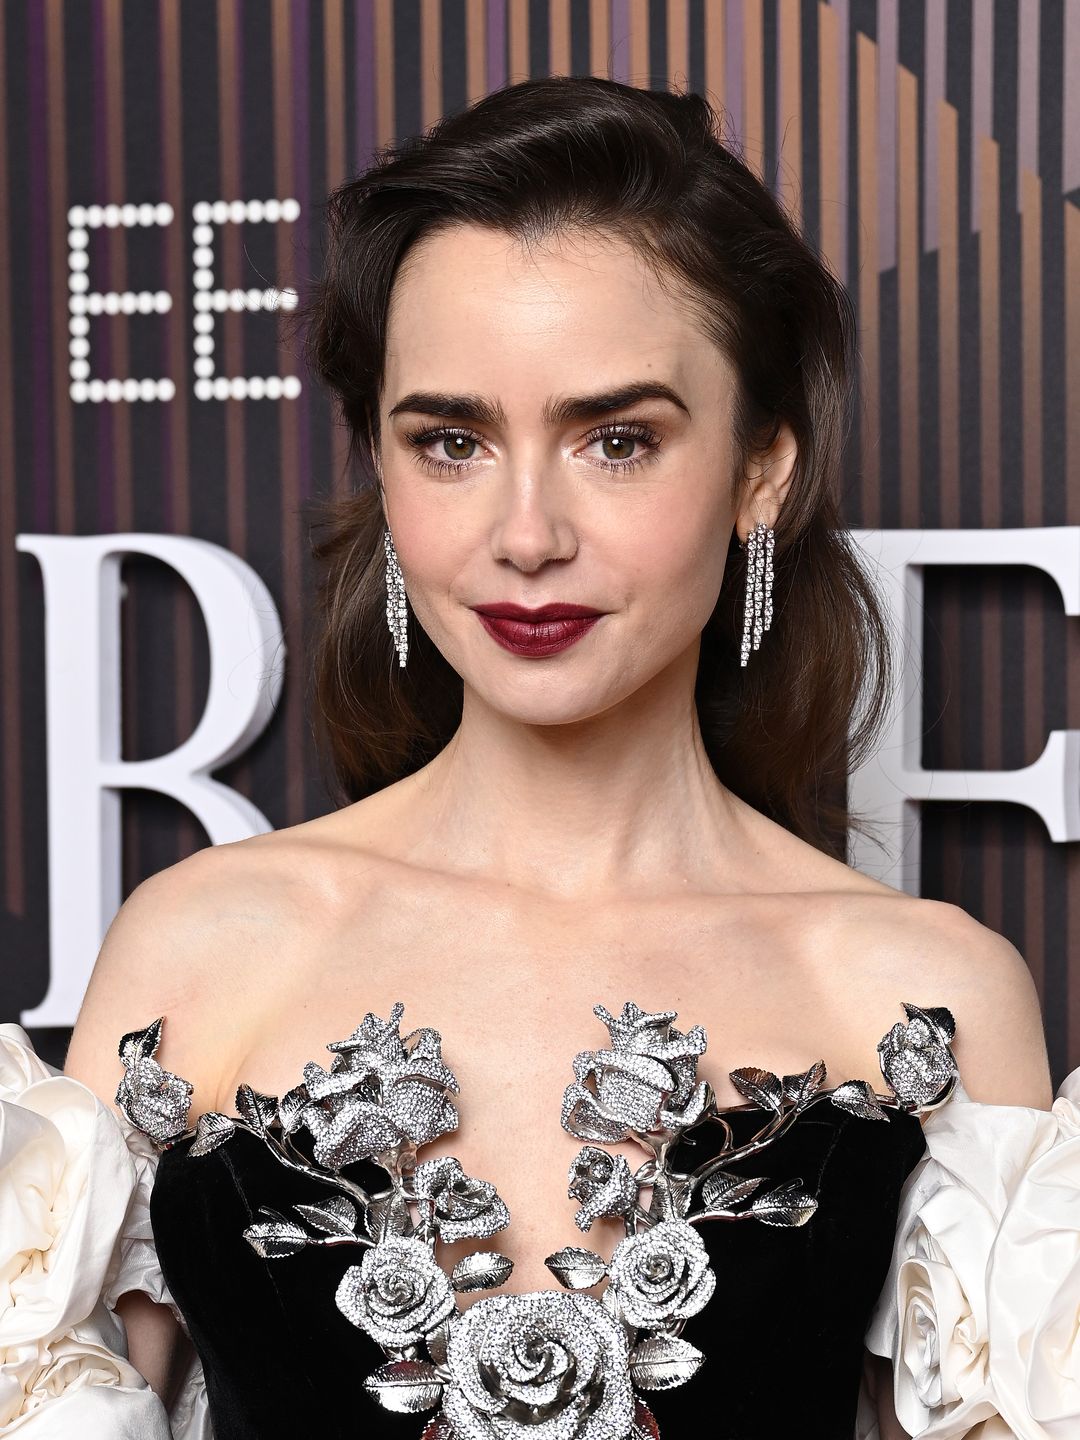 Lily Collins wearing a monochrome gown with 3D roses and a wine-hued lip at the BAFTAs